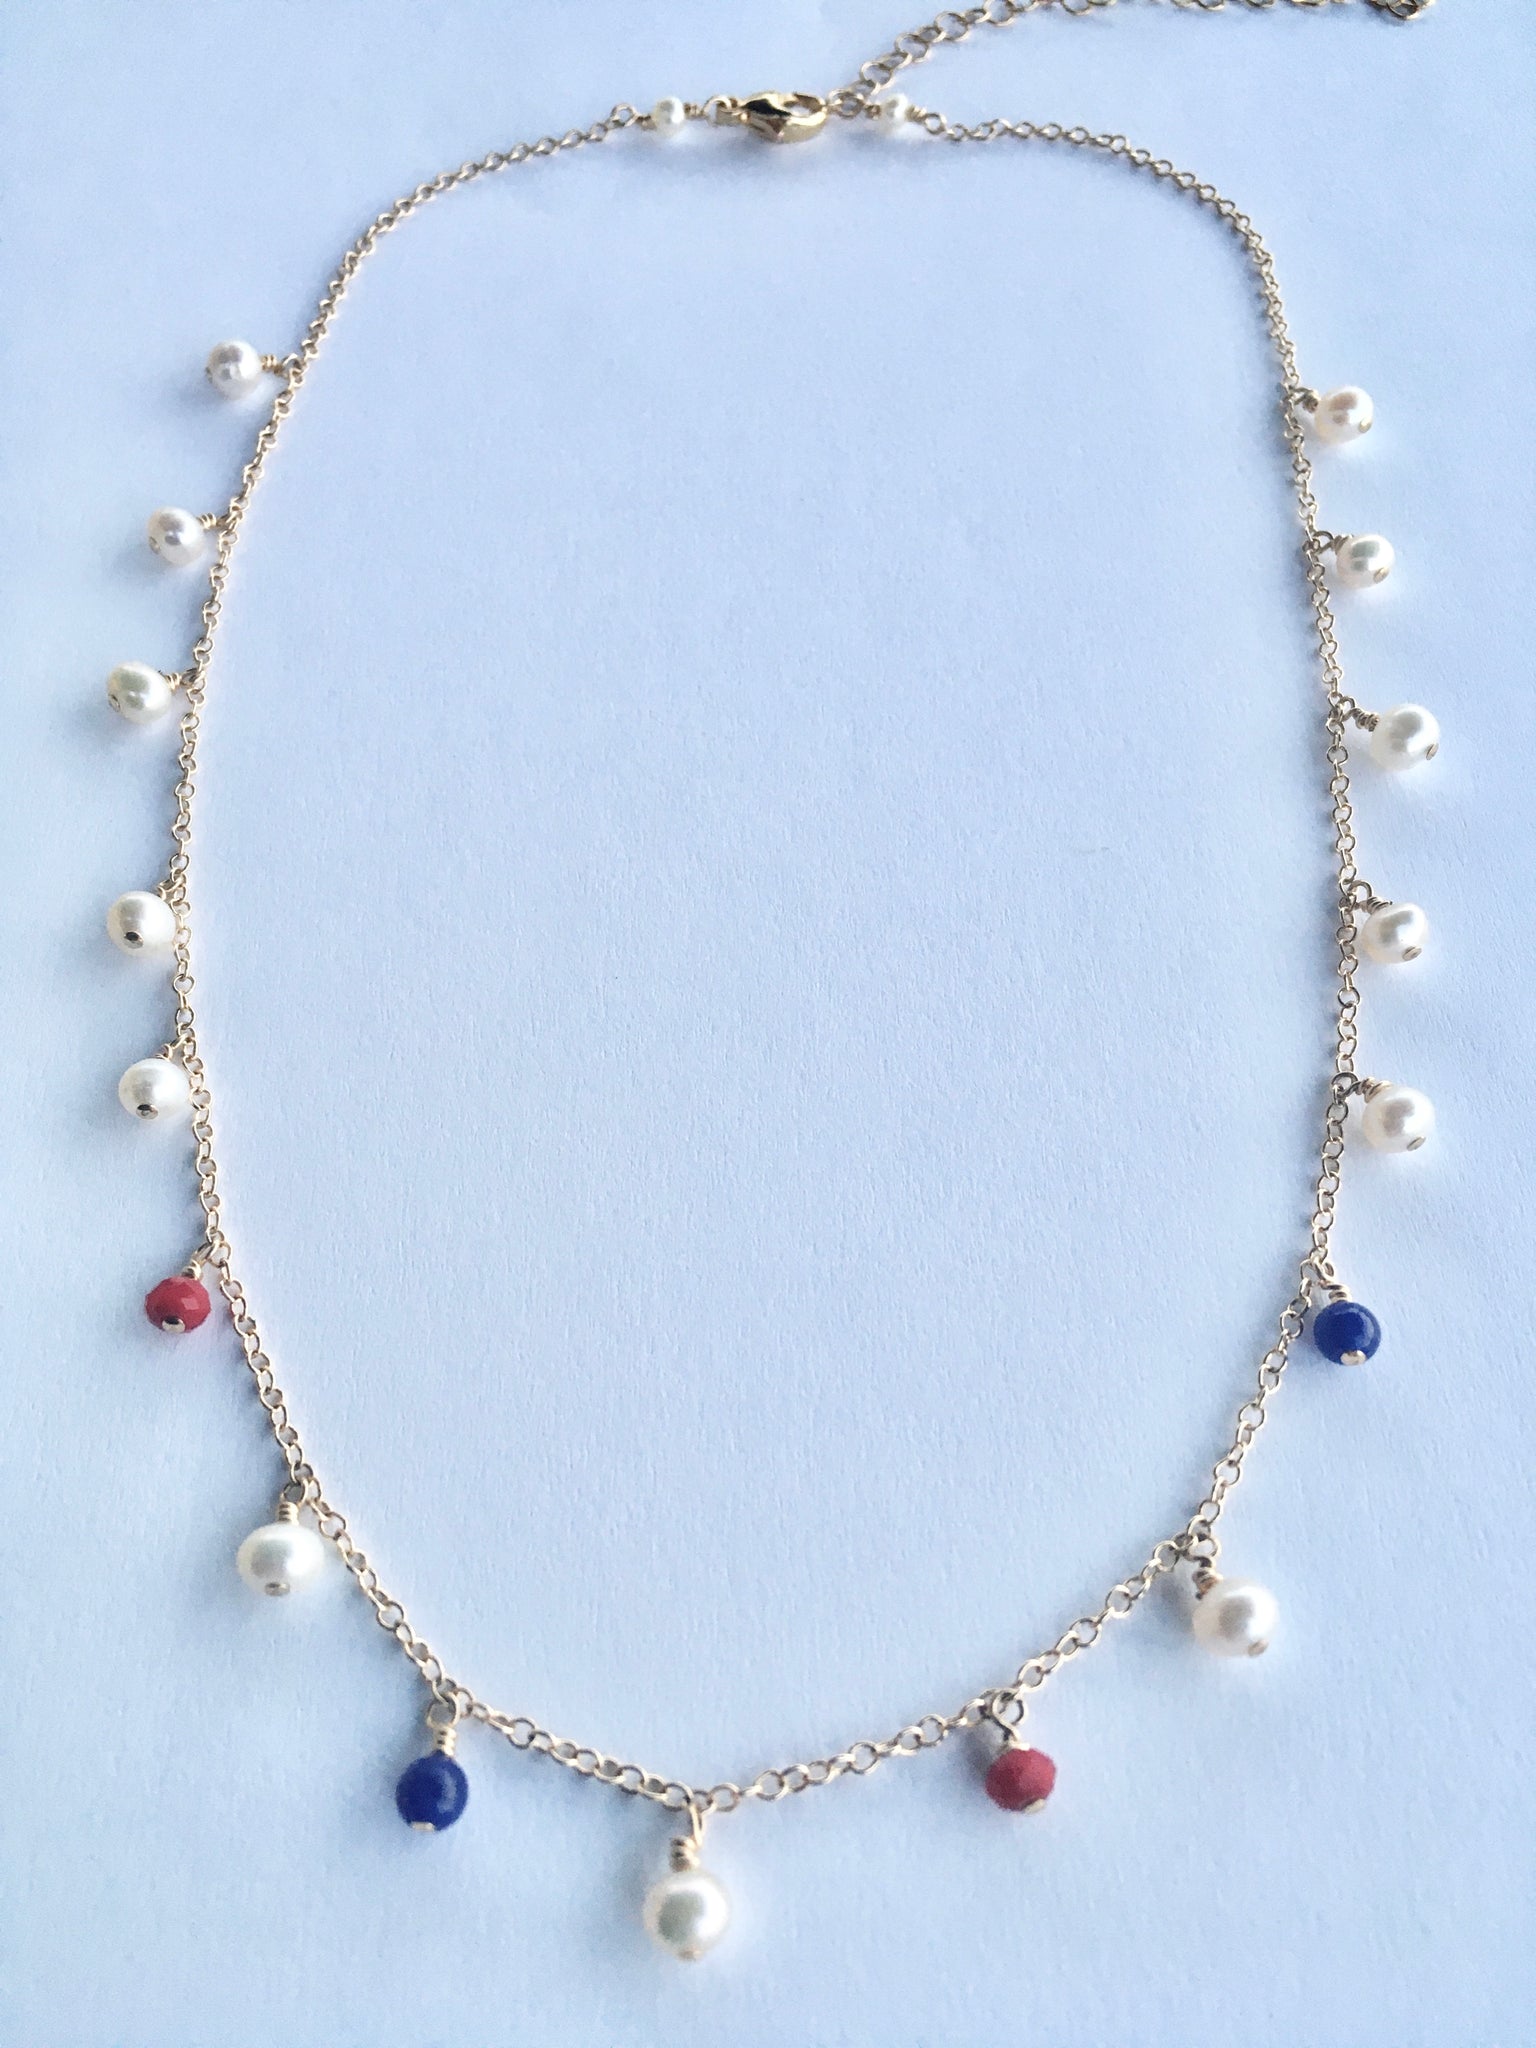 Red White & Blue Pearl Station Necklace | AAA 6mm White Semi-Round Freshwater Cultured Pearls Jewelry,Necklace,Choker Bourdage Pearl Jewelry    sherri bourdage